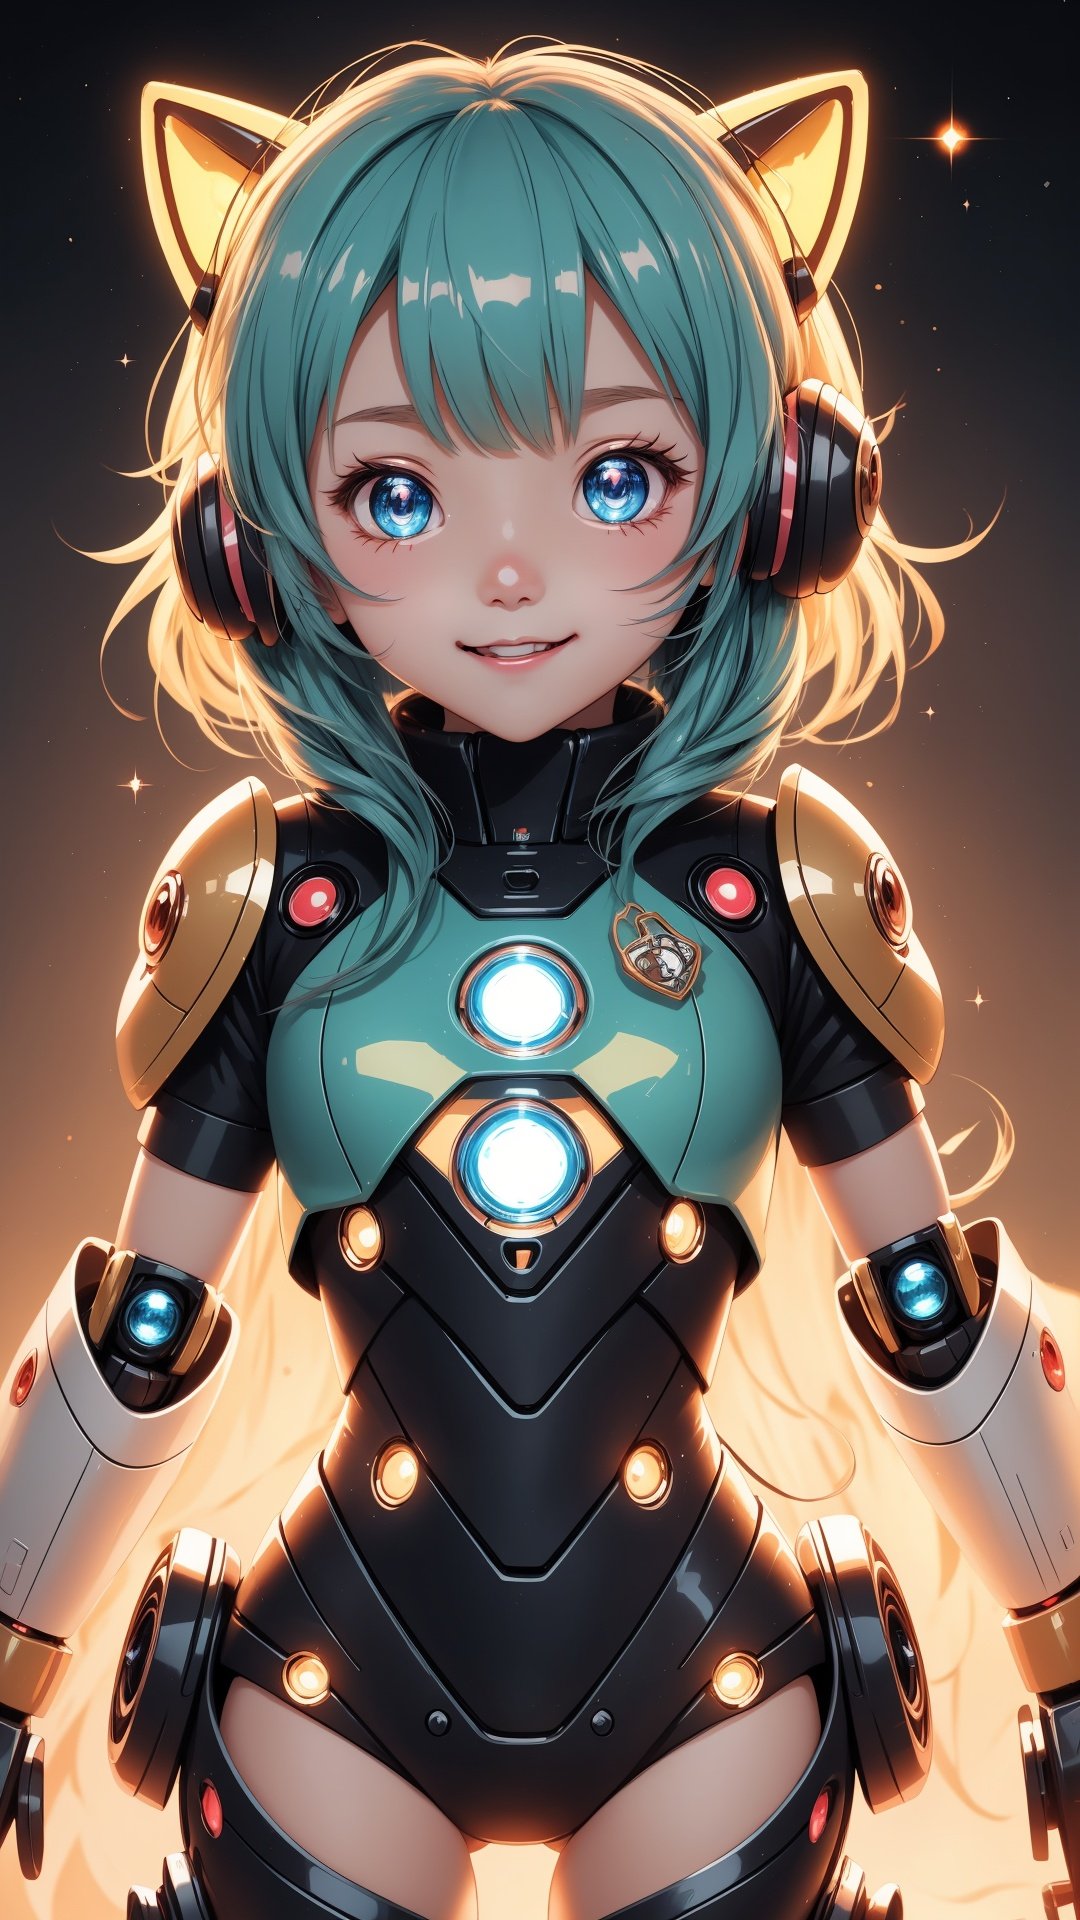 (best quality,ultra-detailed),Cute Chibi Robot,illustration,[bright colors],[sparkling eyes],[playful pose],fun and energetic,medium:anime-style,soft lighting